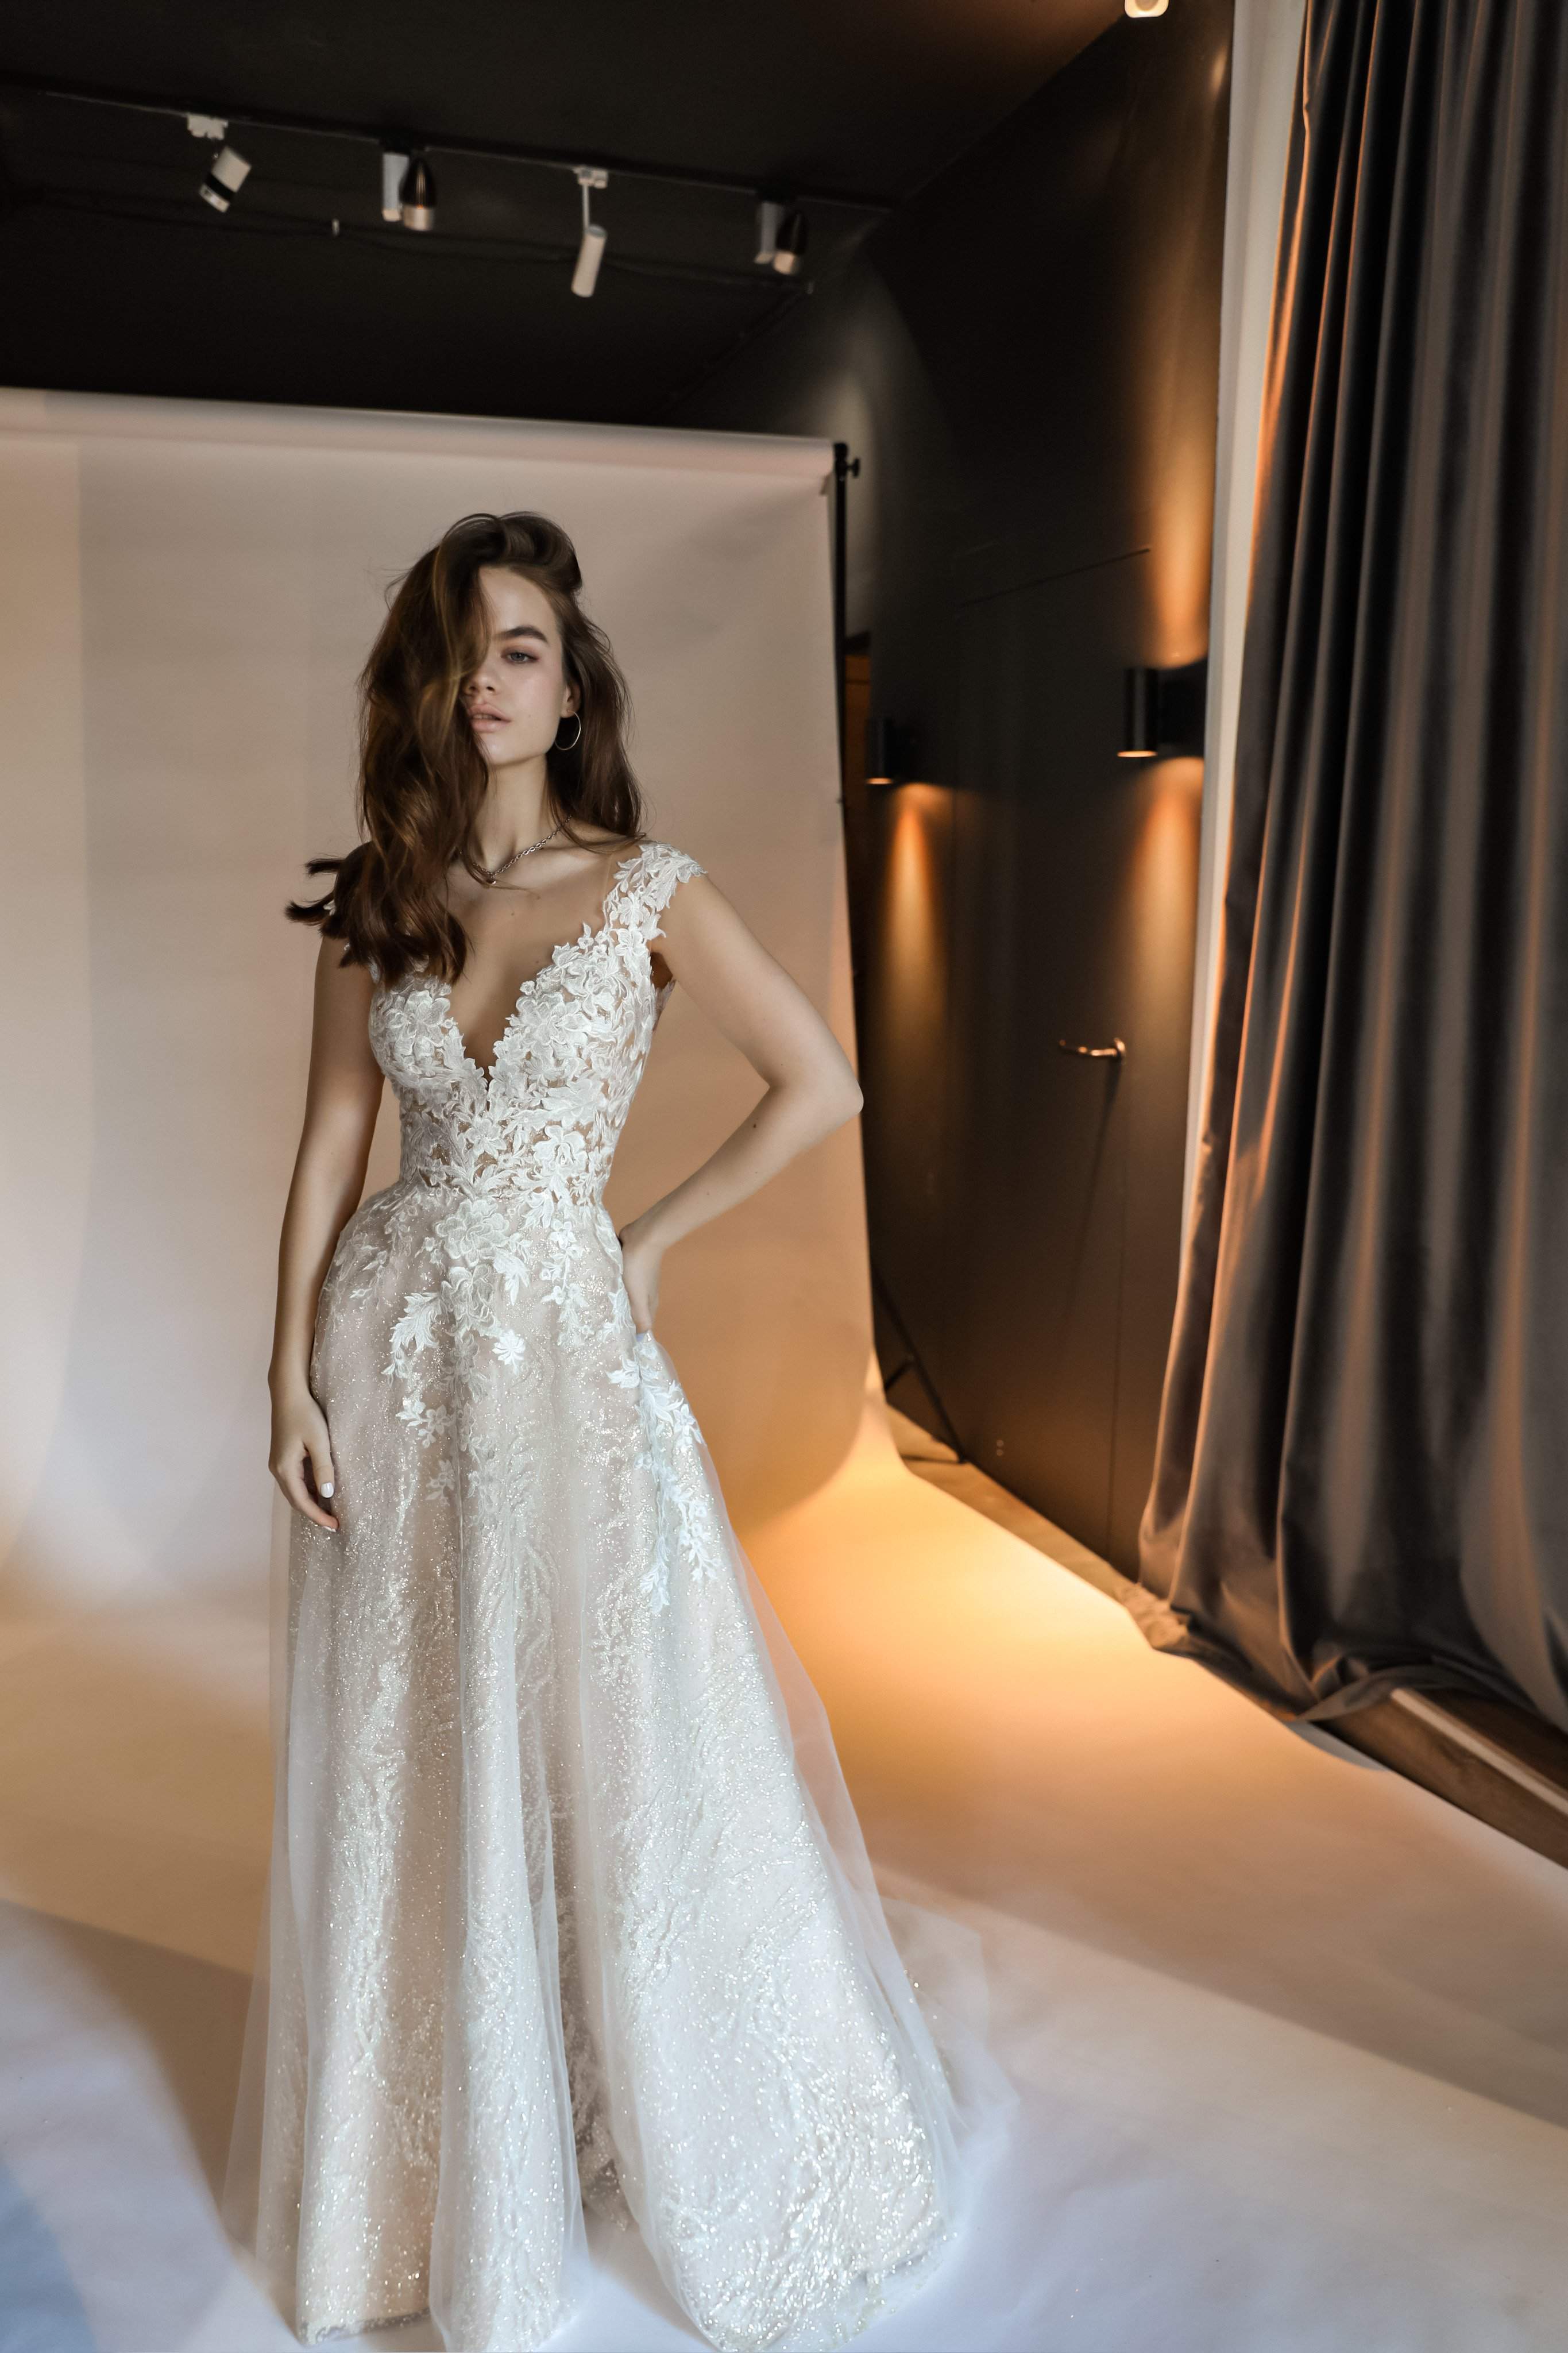 Introducing the Latest Wedding Dress Trends